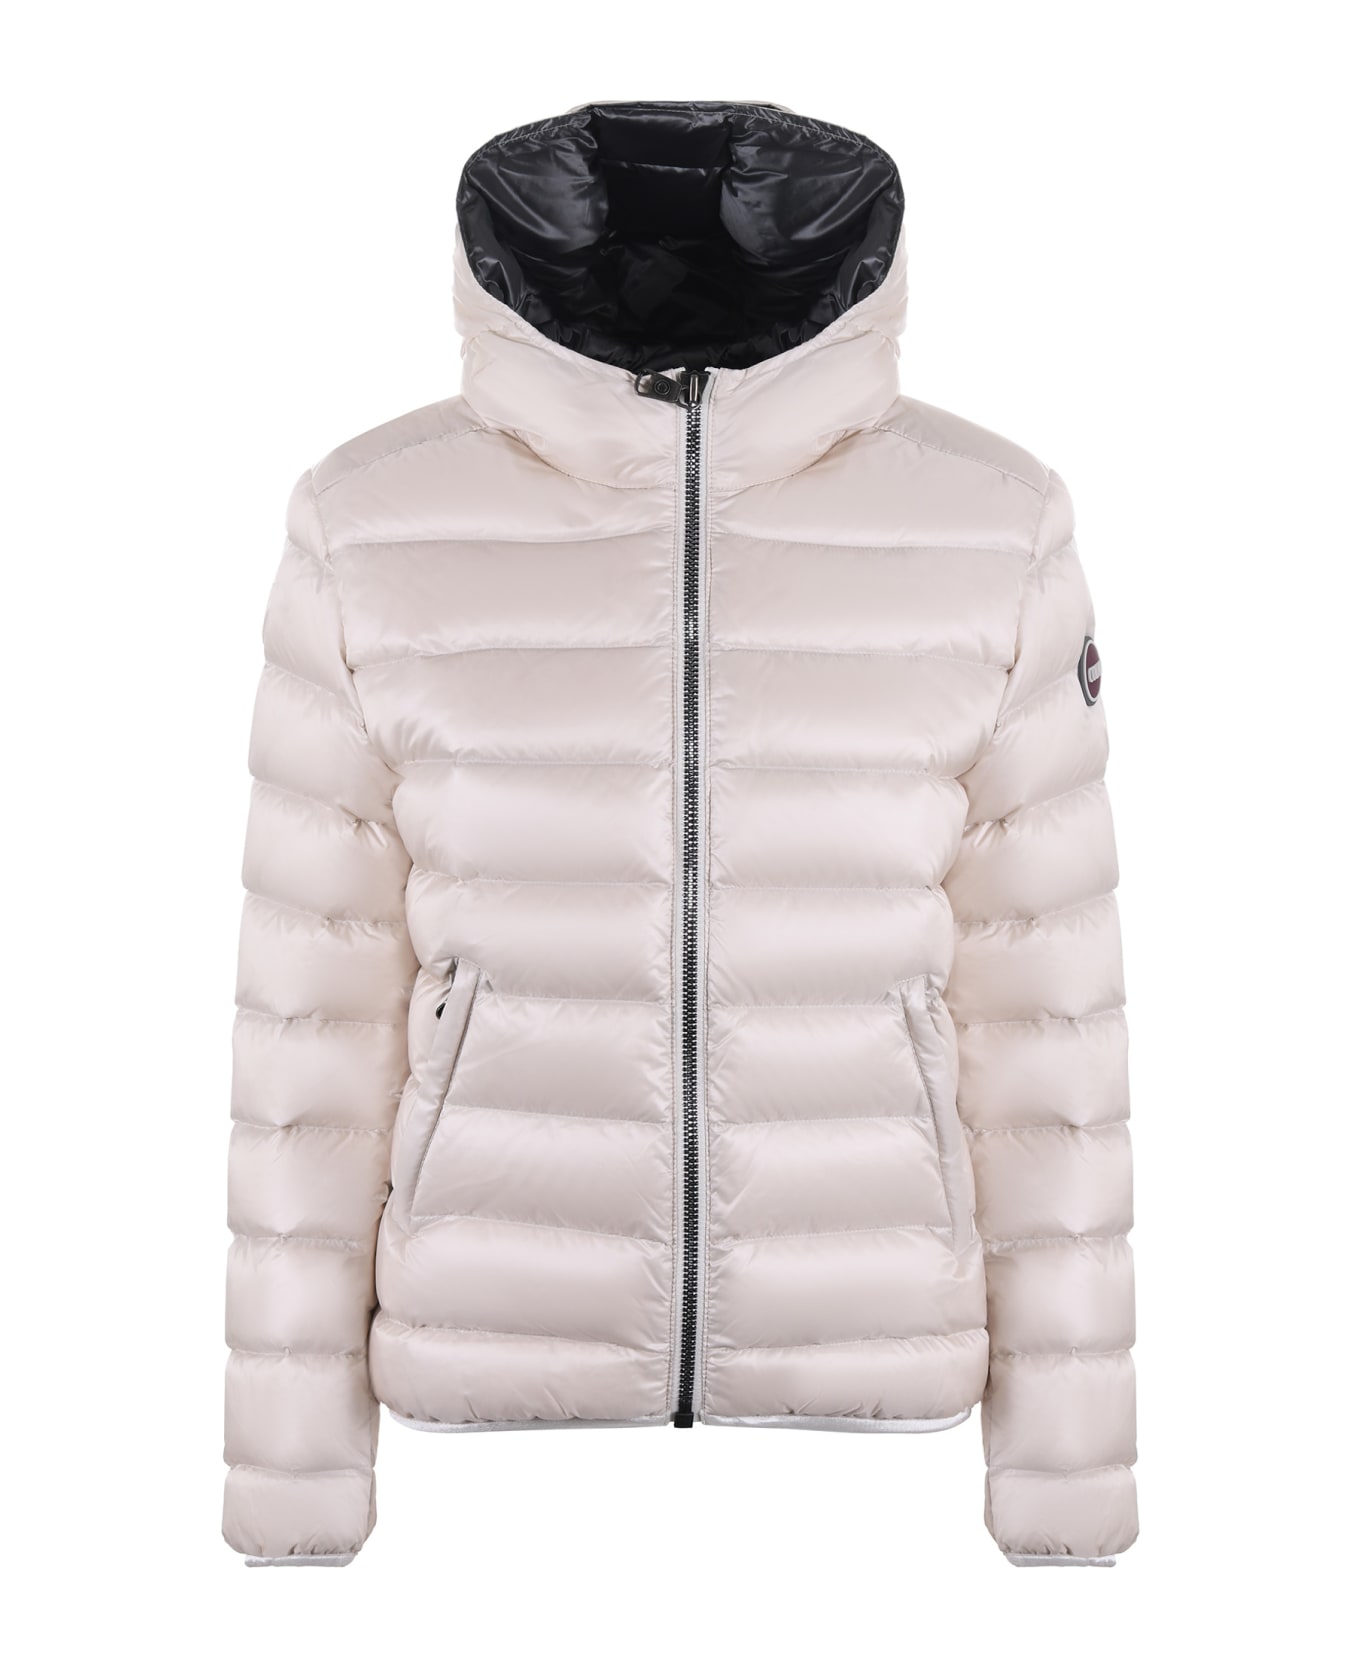 Colmar Originals Quilted Nylon Down Jacket | italist, ALWAYS LIKE A SALE